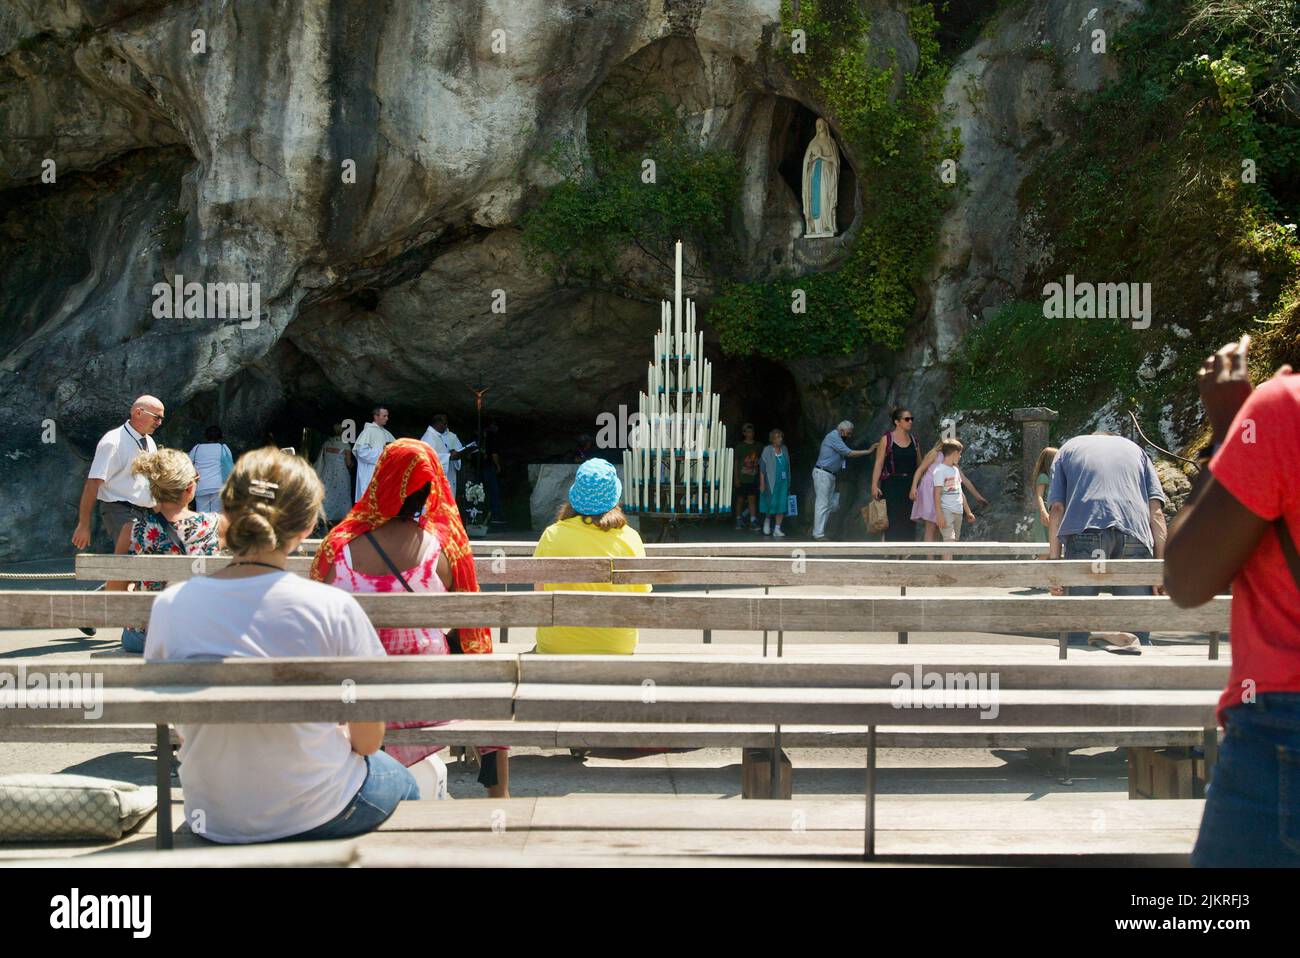 People gathered at the Grotto of Massabielle/Grotto of the Apparitions at Sanctuary of Our Lady of Lourdes, Pilgrimage at Lourdes people in the grotto Stock Photo